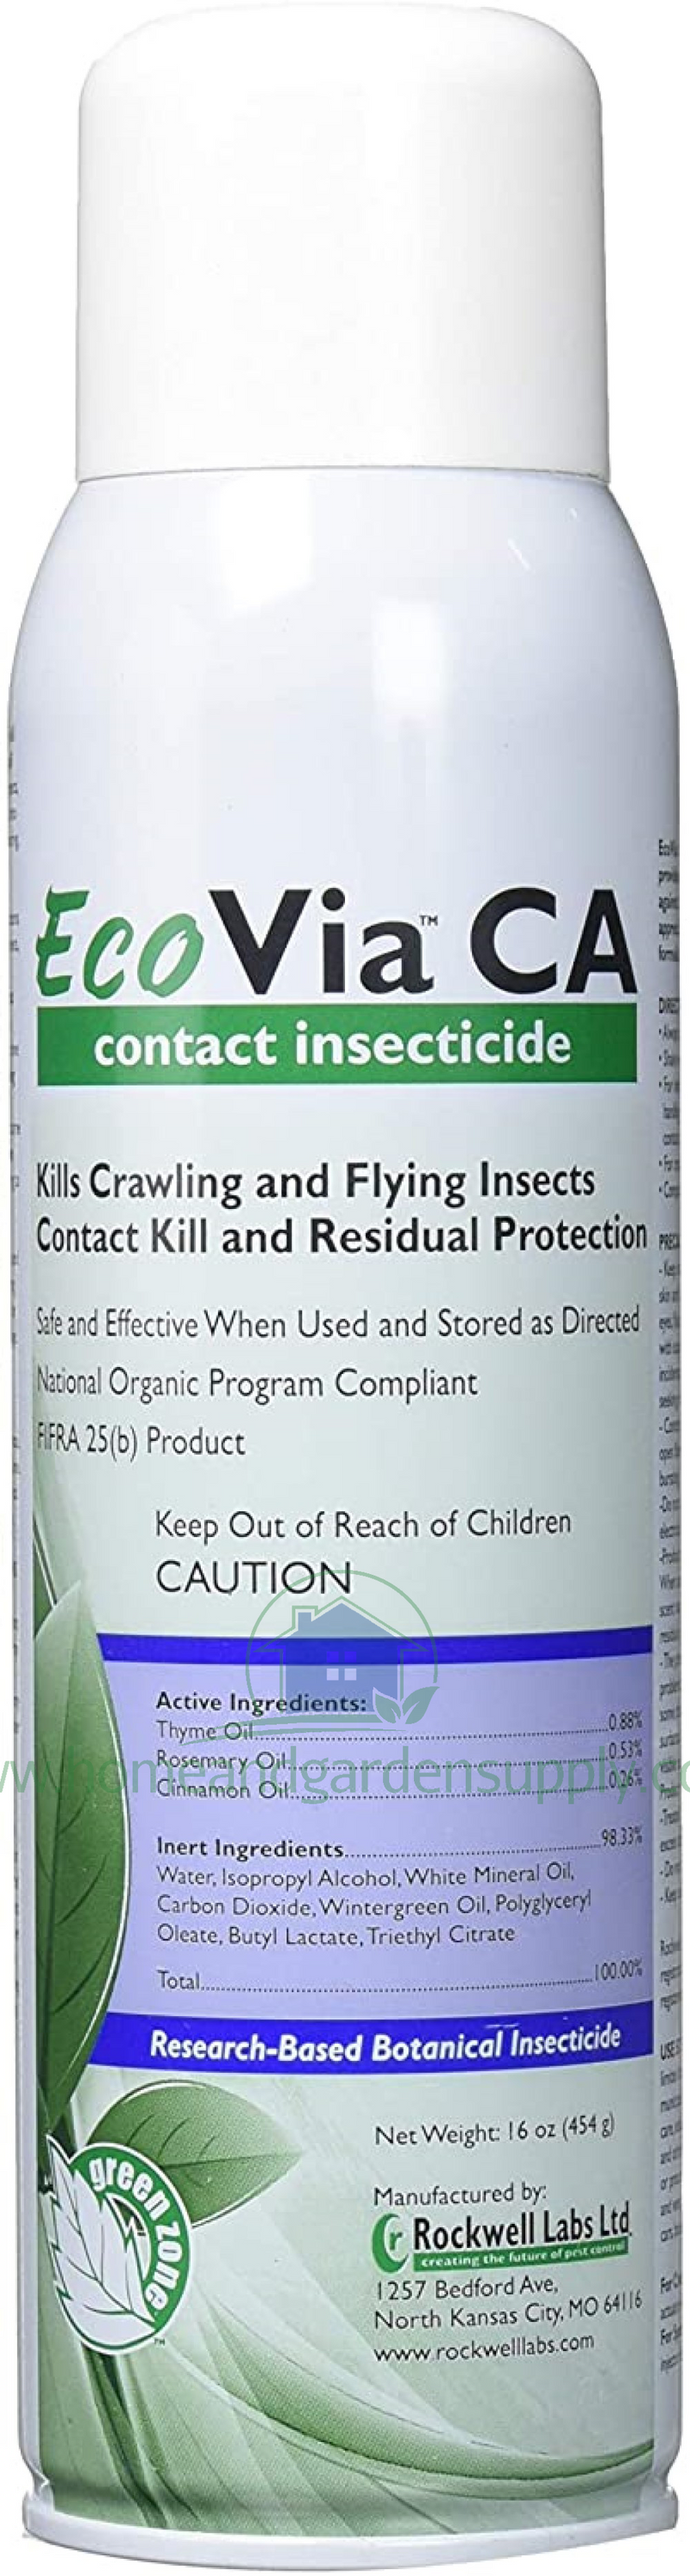 EcoVia CA Contact Insecticide